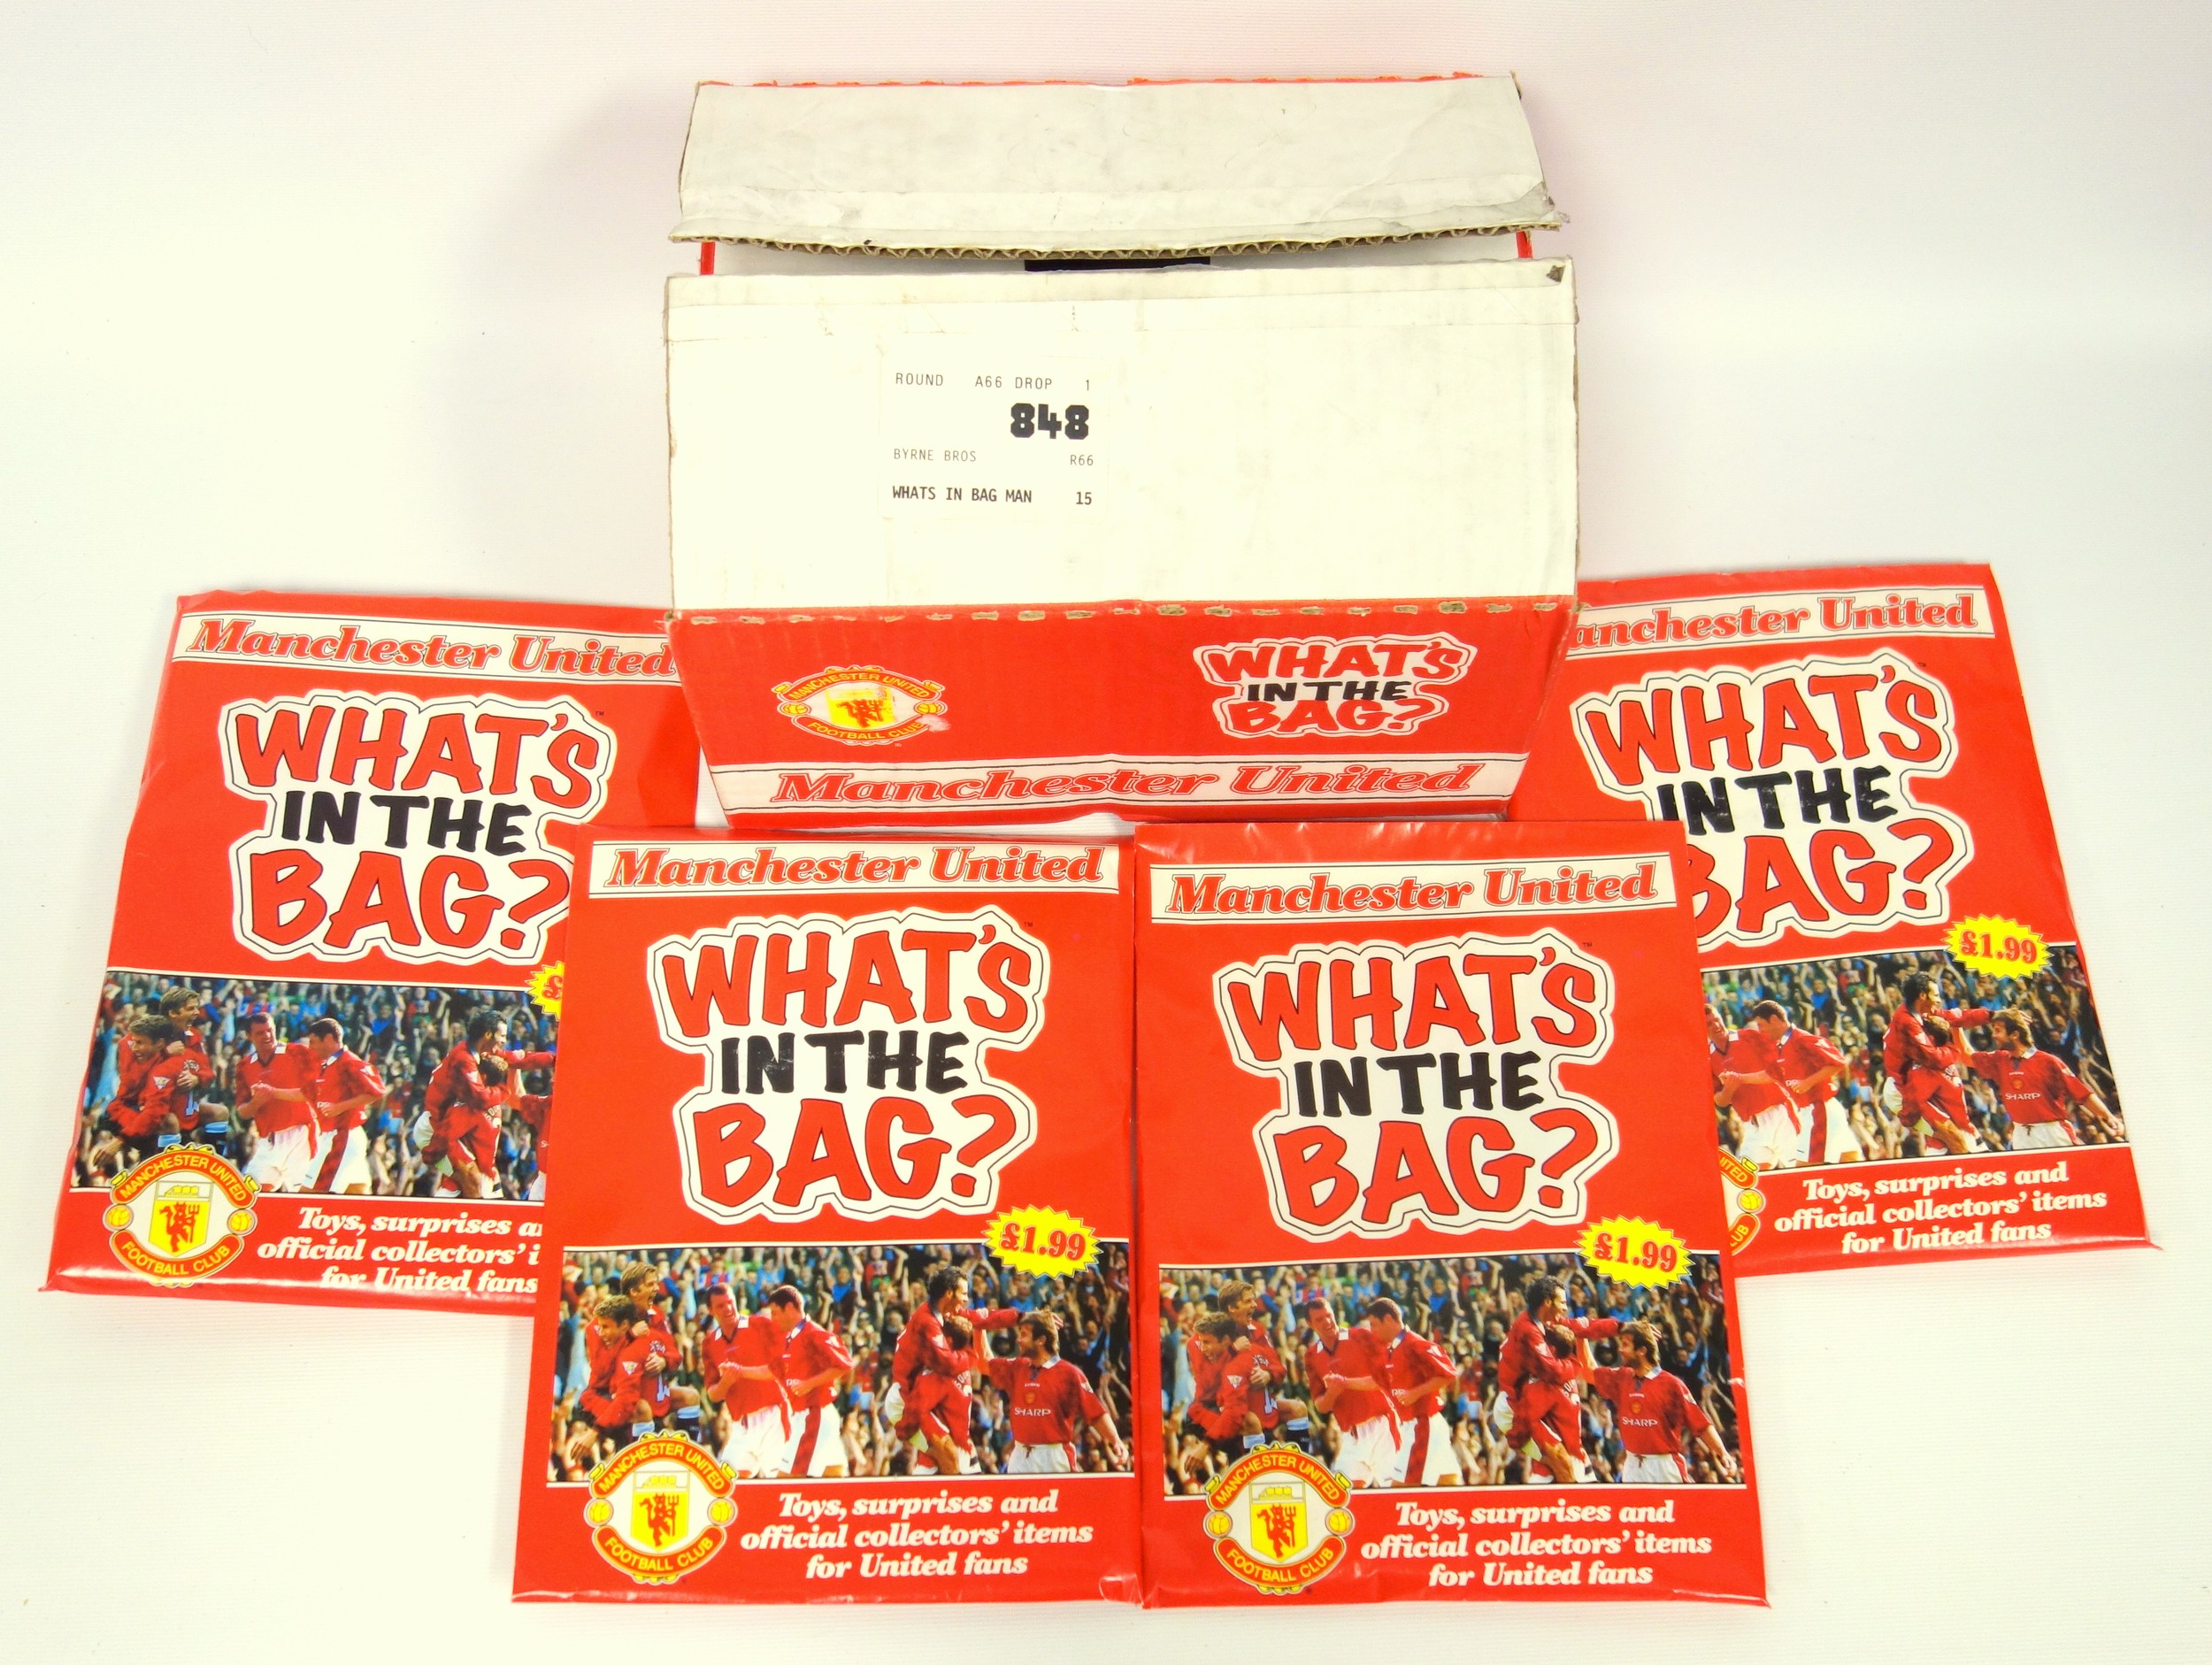 Four rare unopened Manchester United Football Club 'WHAT'S IN THE BAG?' Toys, surprises and official